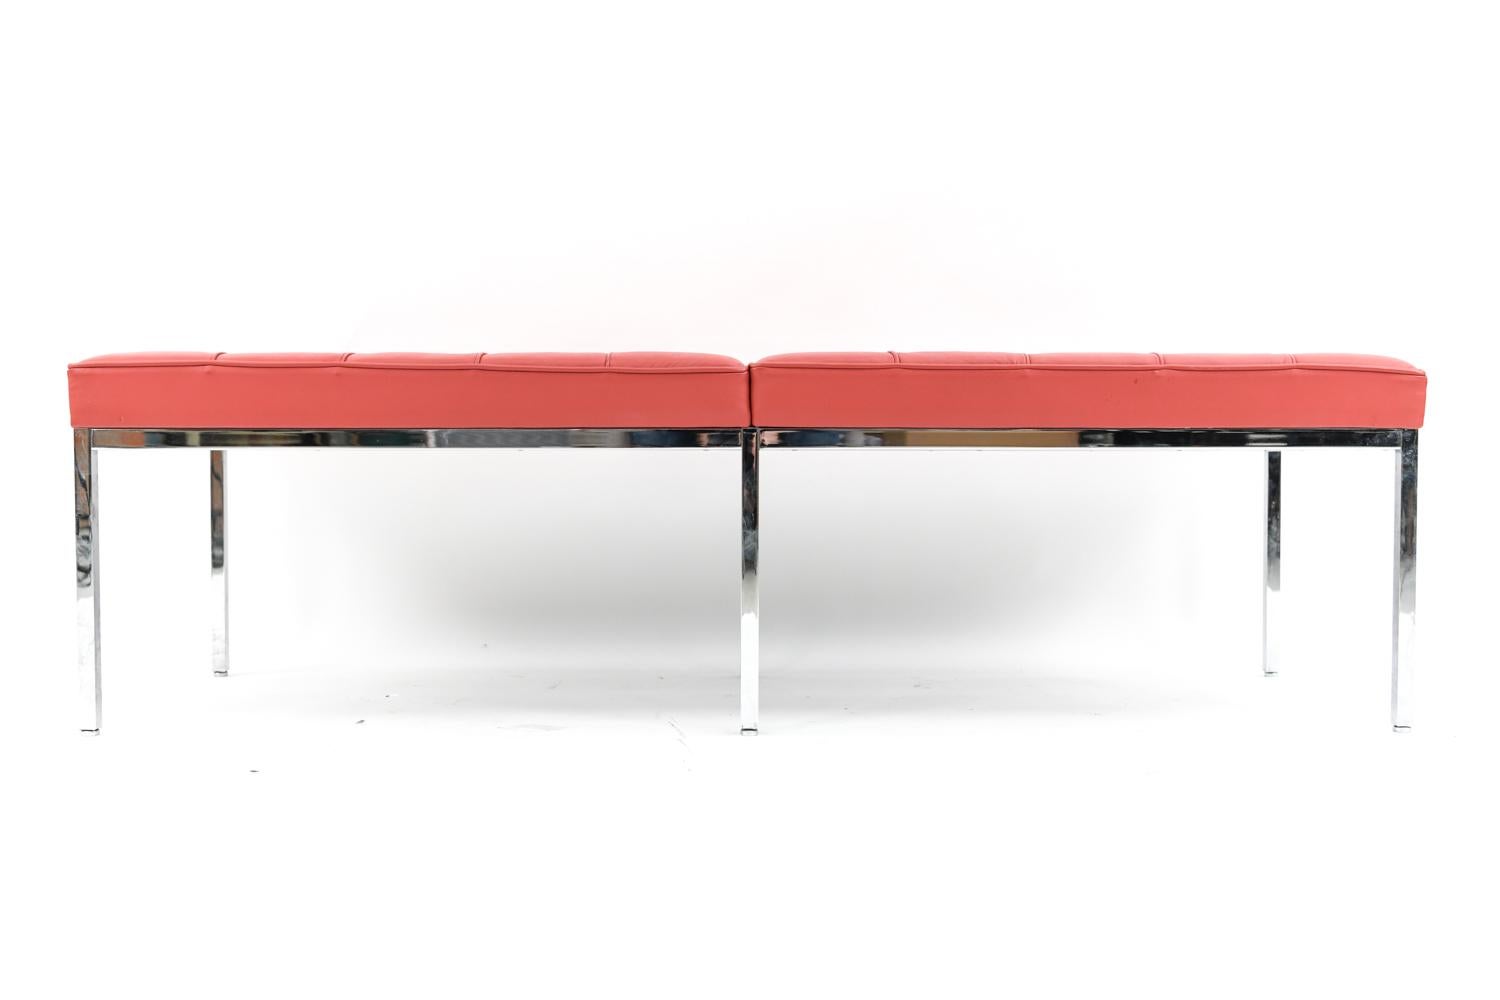 Since its inception in 1954, the Florence Knoll bench has become an icon of rational modernist design. Its spare, geometric profile and modular design makes it adaptable to infinite spaces and configurations. This listing includes two large 